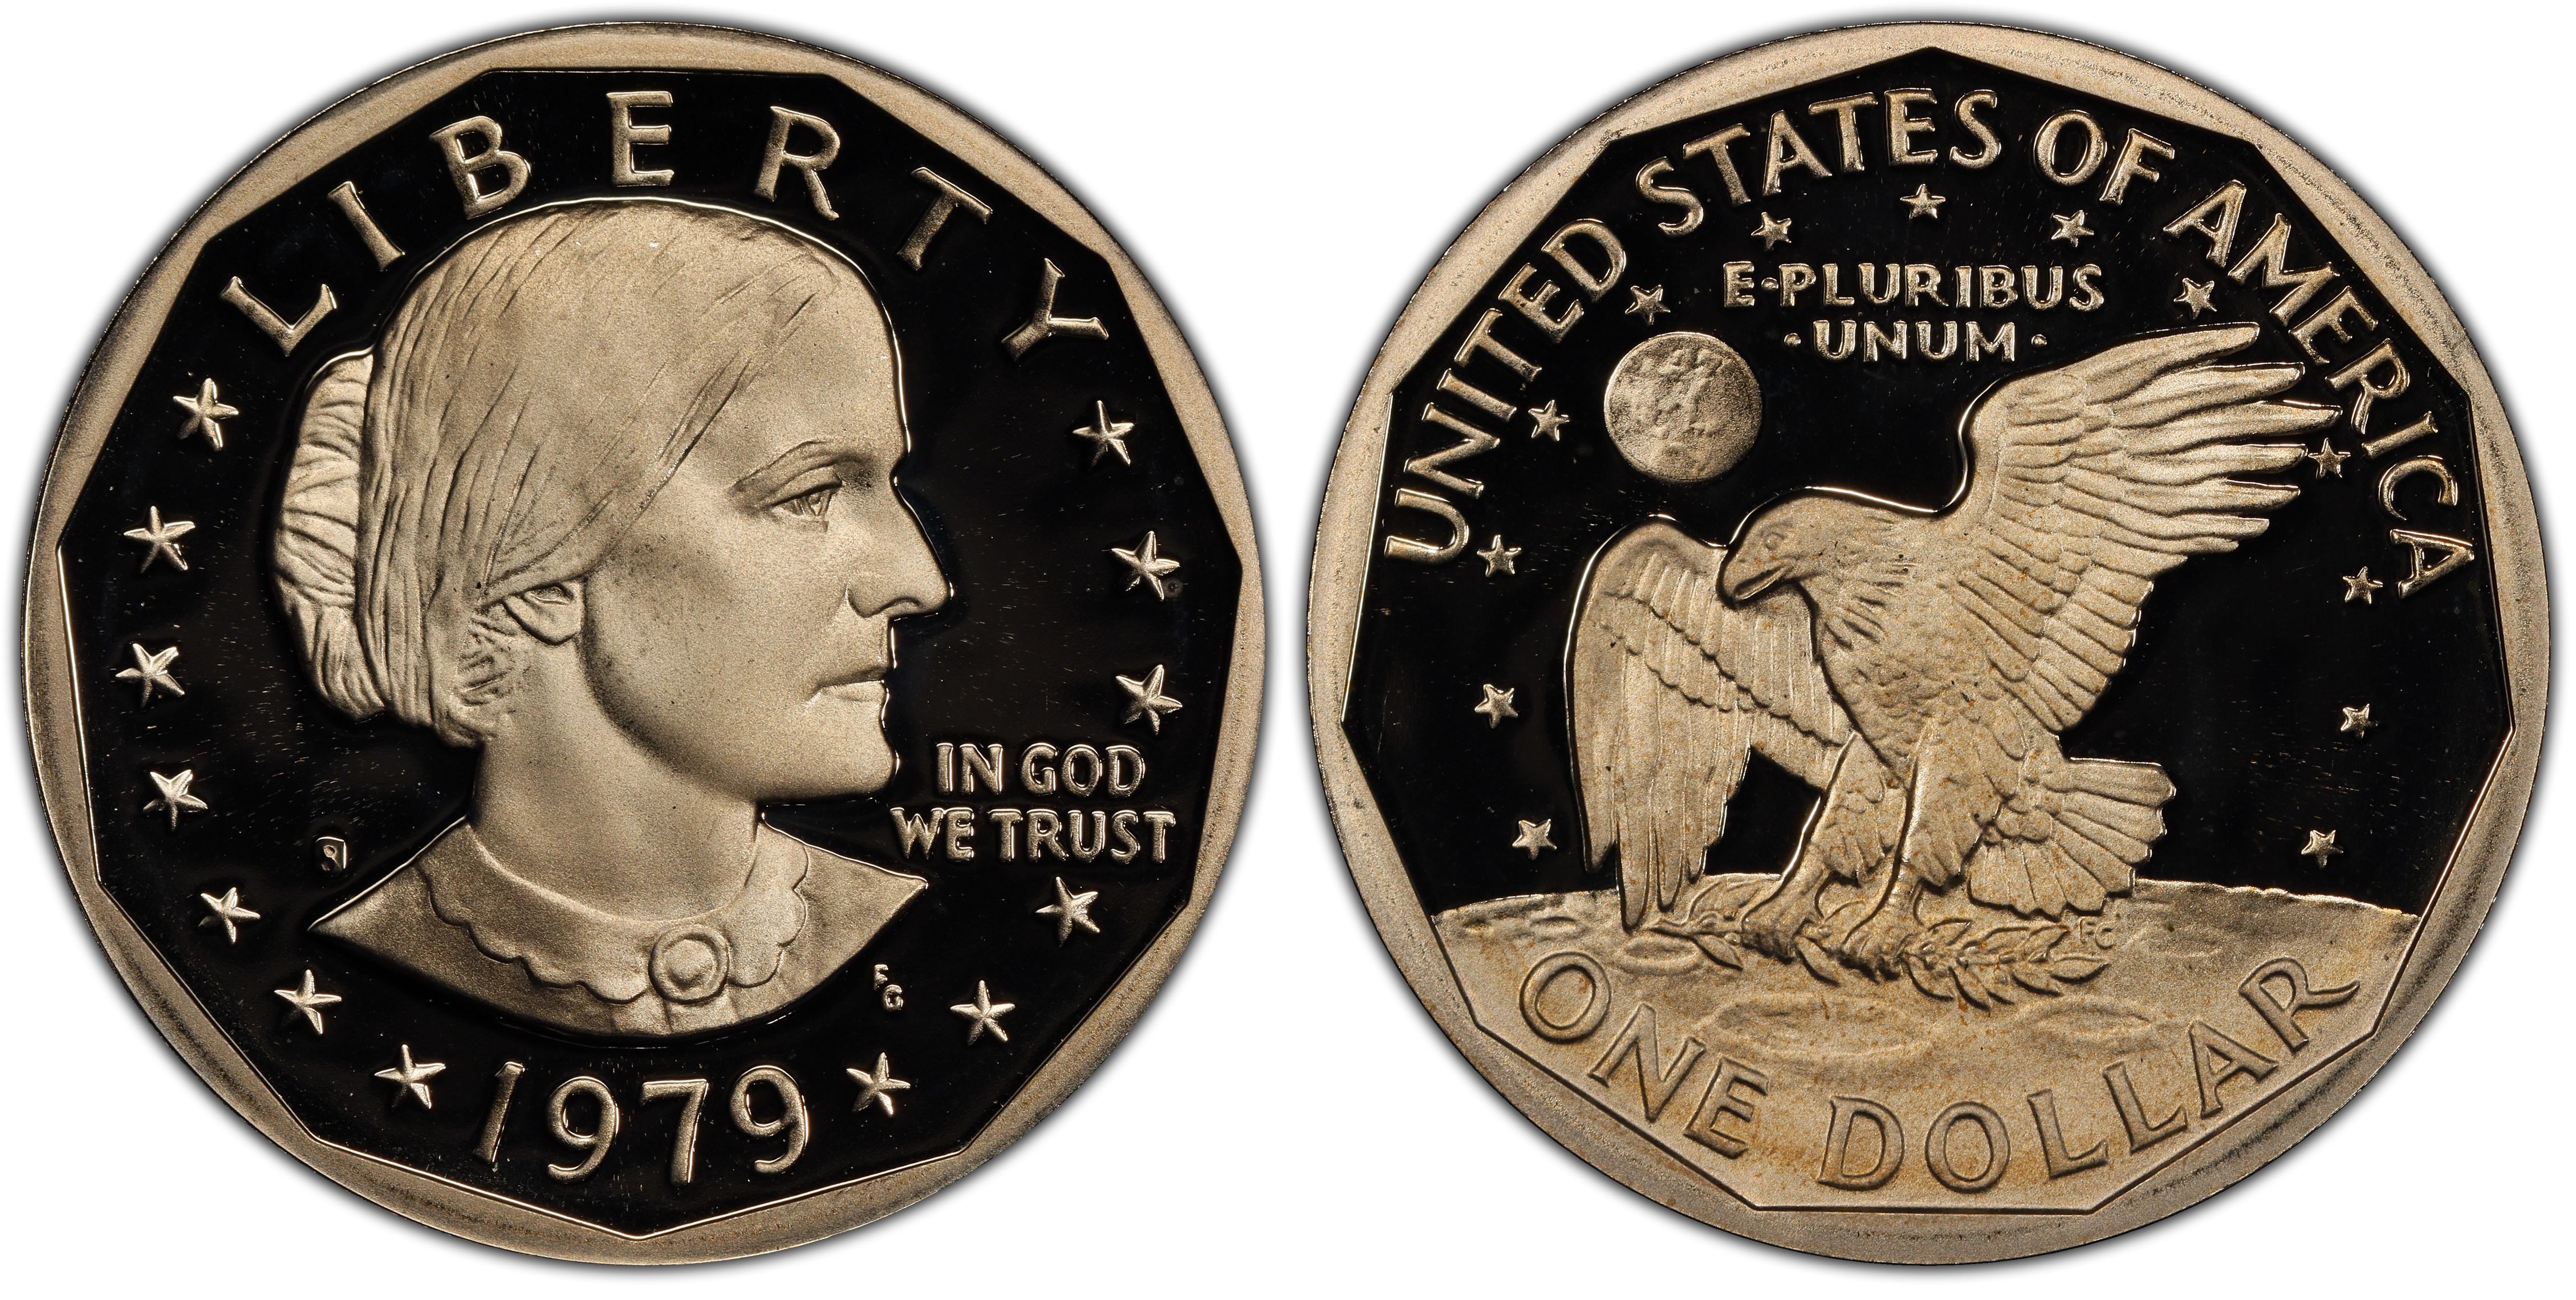 1979 S Type 1 Proof Susan B Anthony Dollar coin 